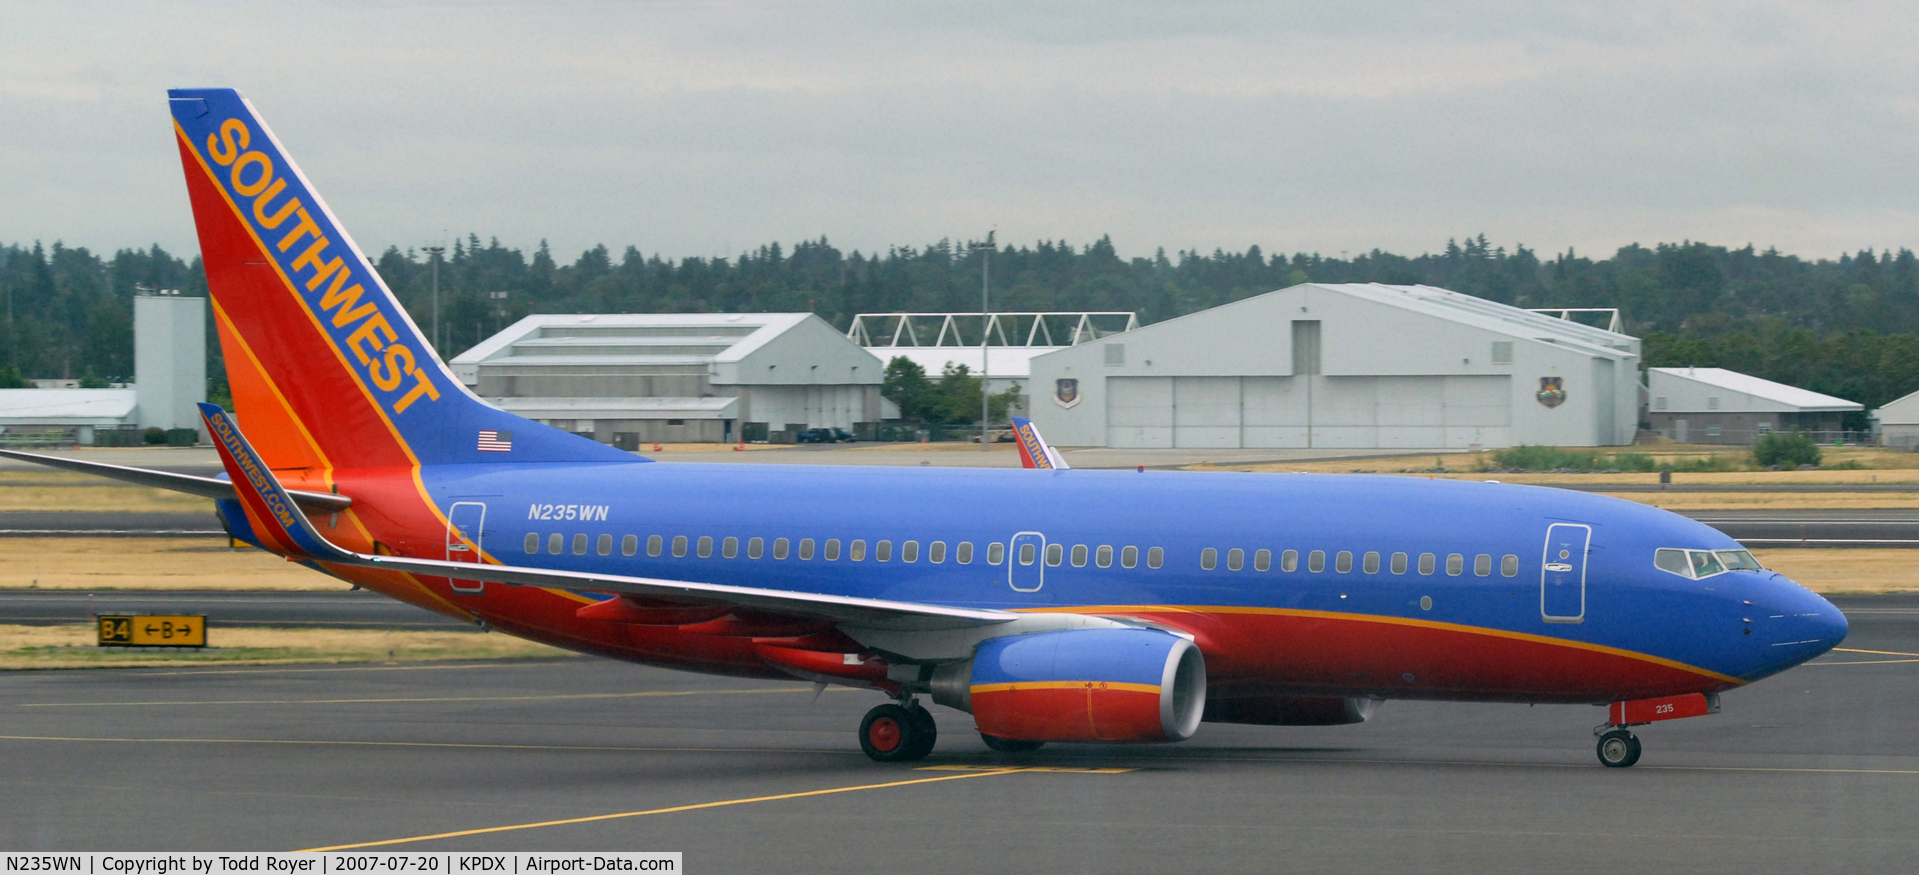 N235WN, 2006 Boeing 737-7H4 C/N 34630, Taxi for departure